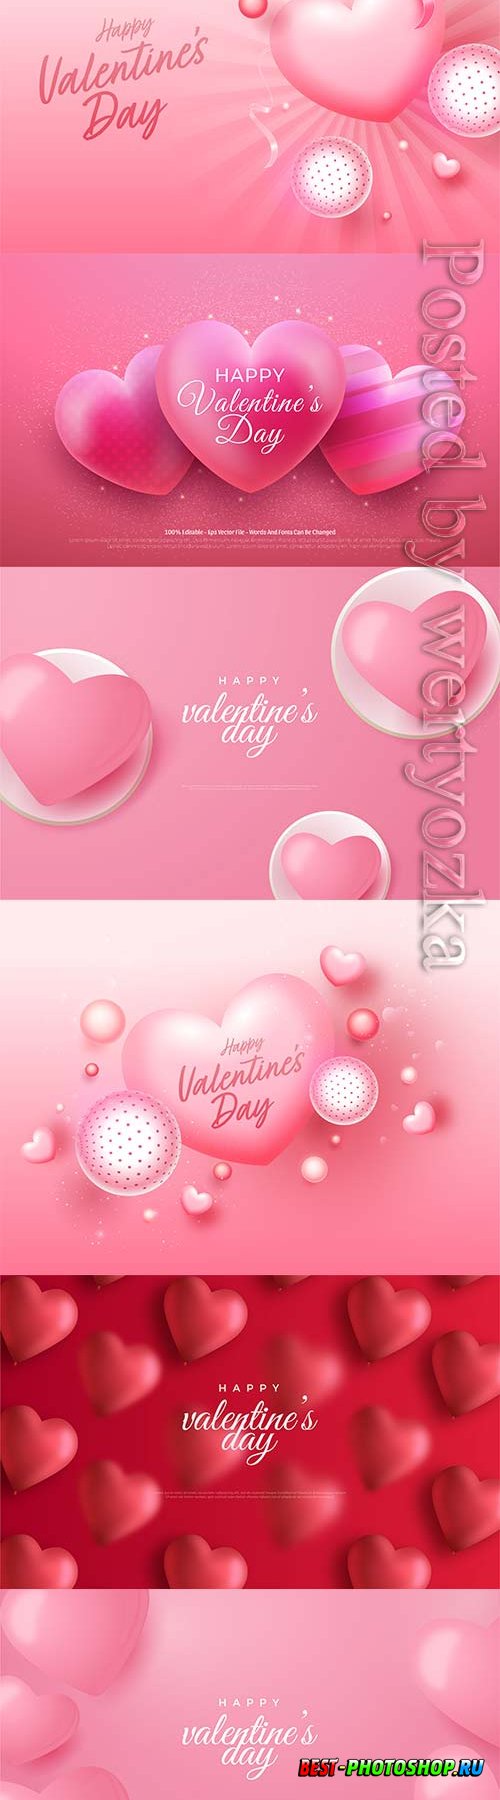 Valentine's day with realistic vector hearts